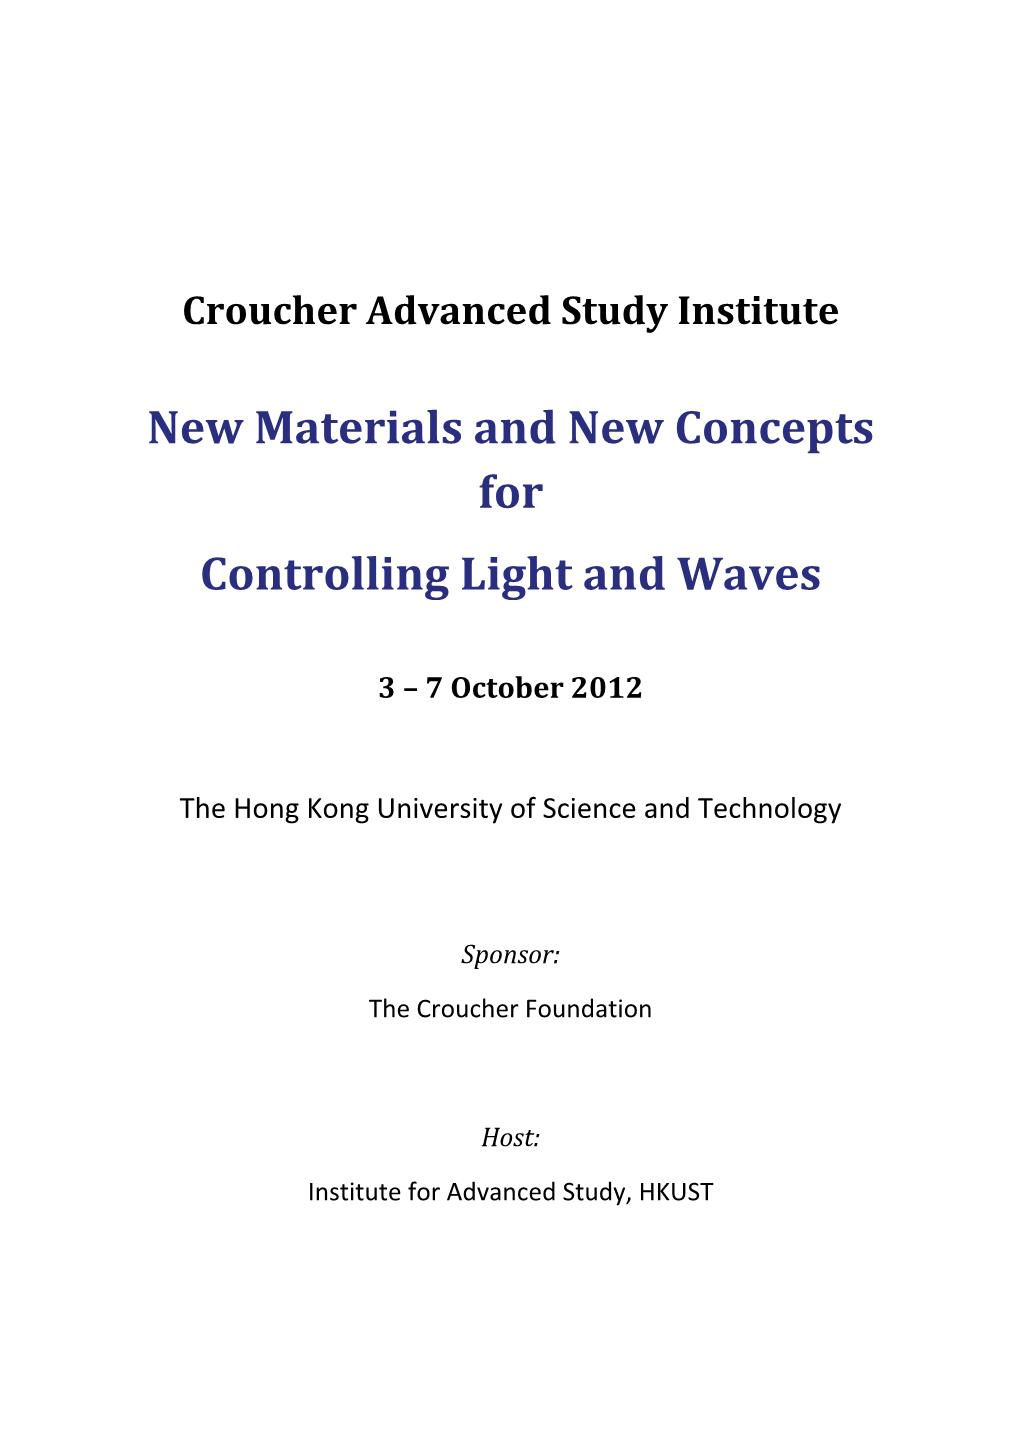 New Materials and New Concepts for Controlling Light and Waves